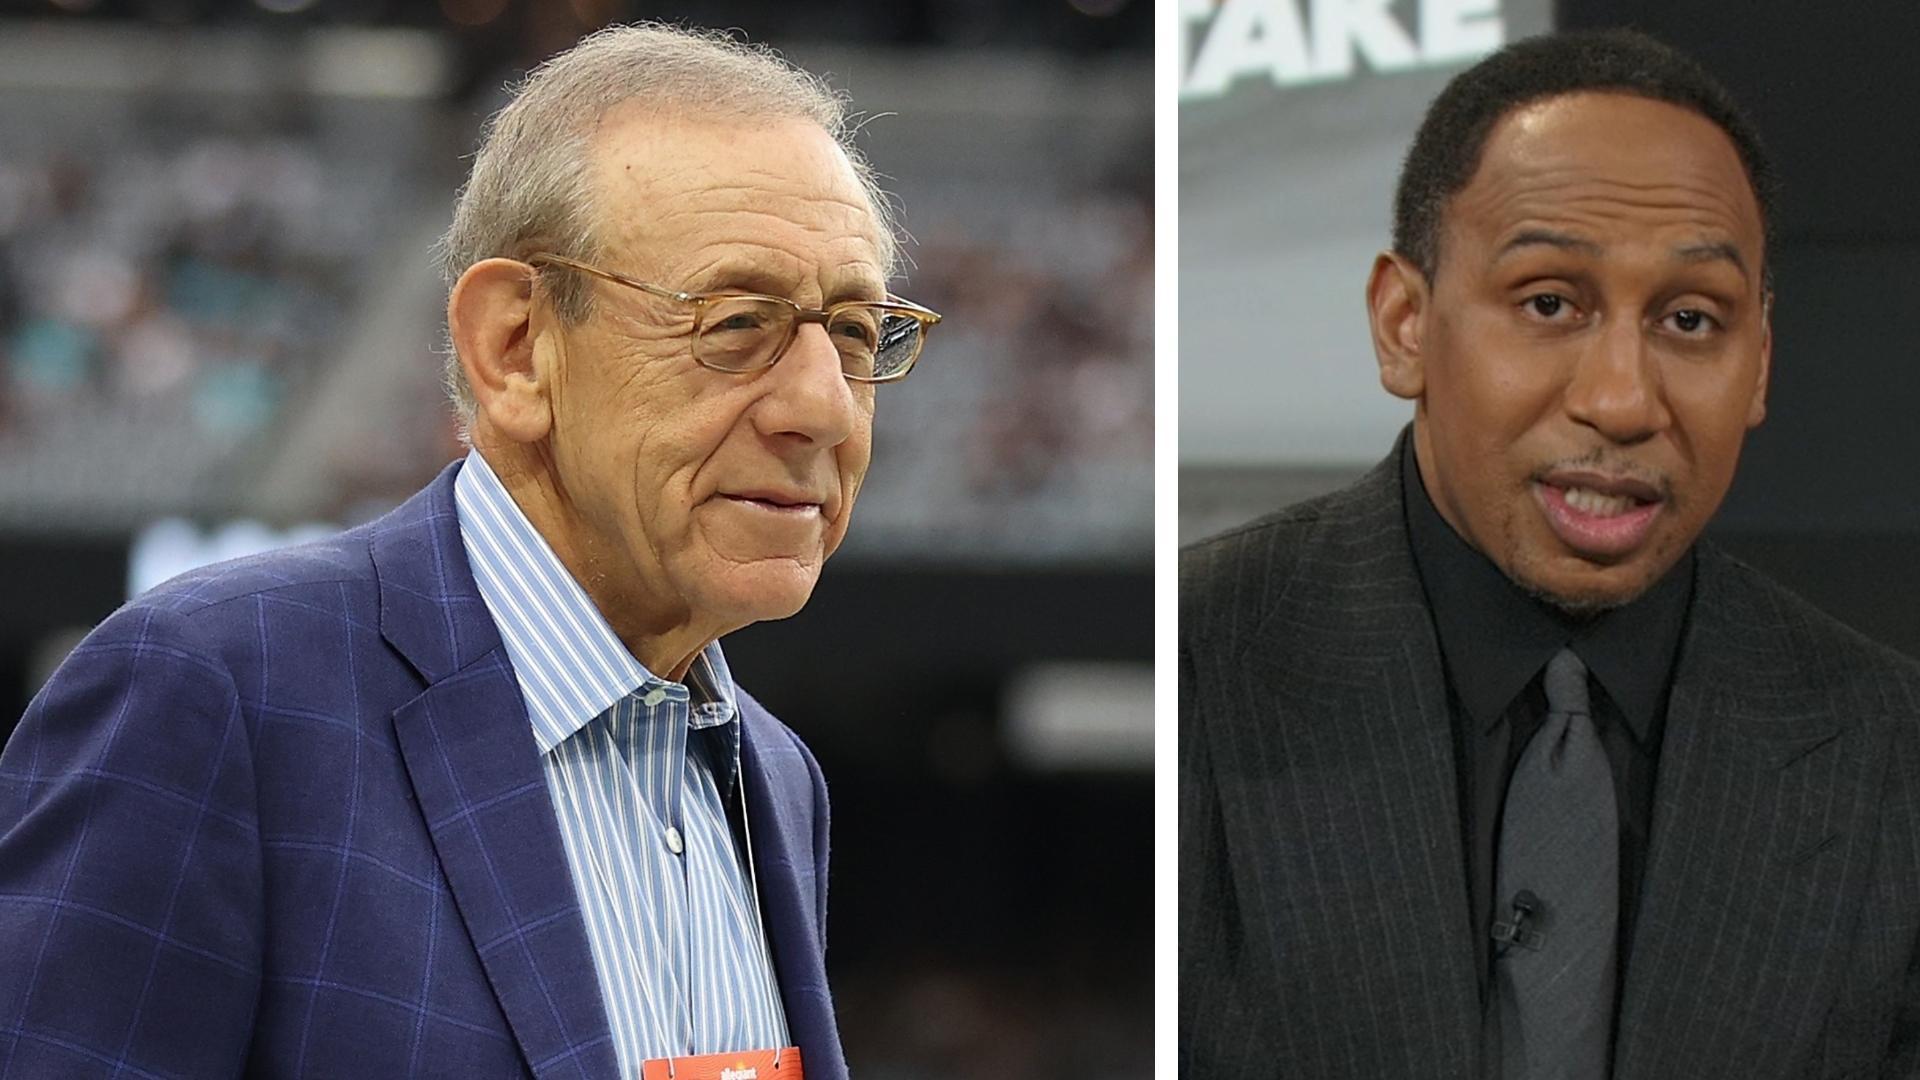 Stephen A. calls for Stephen Ross' removal as NFL owner if bribery allegations are true